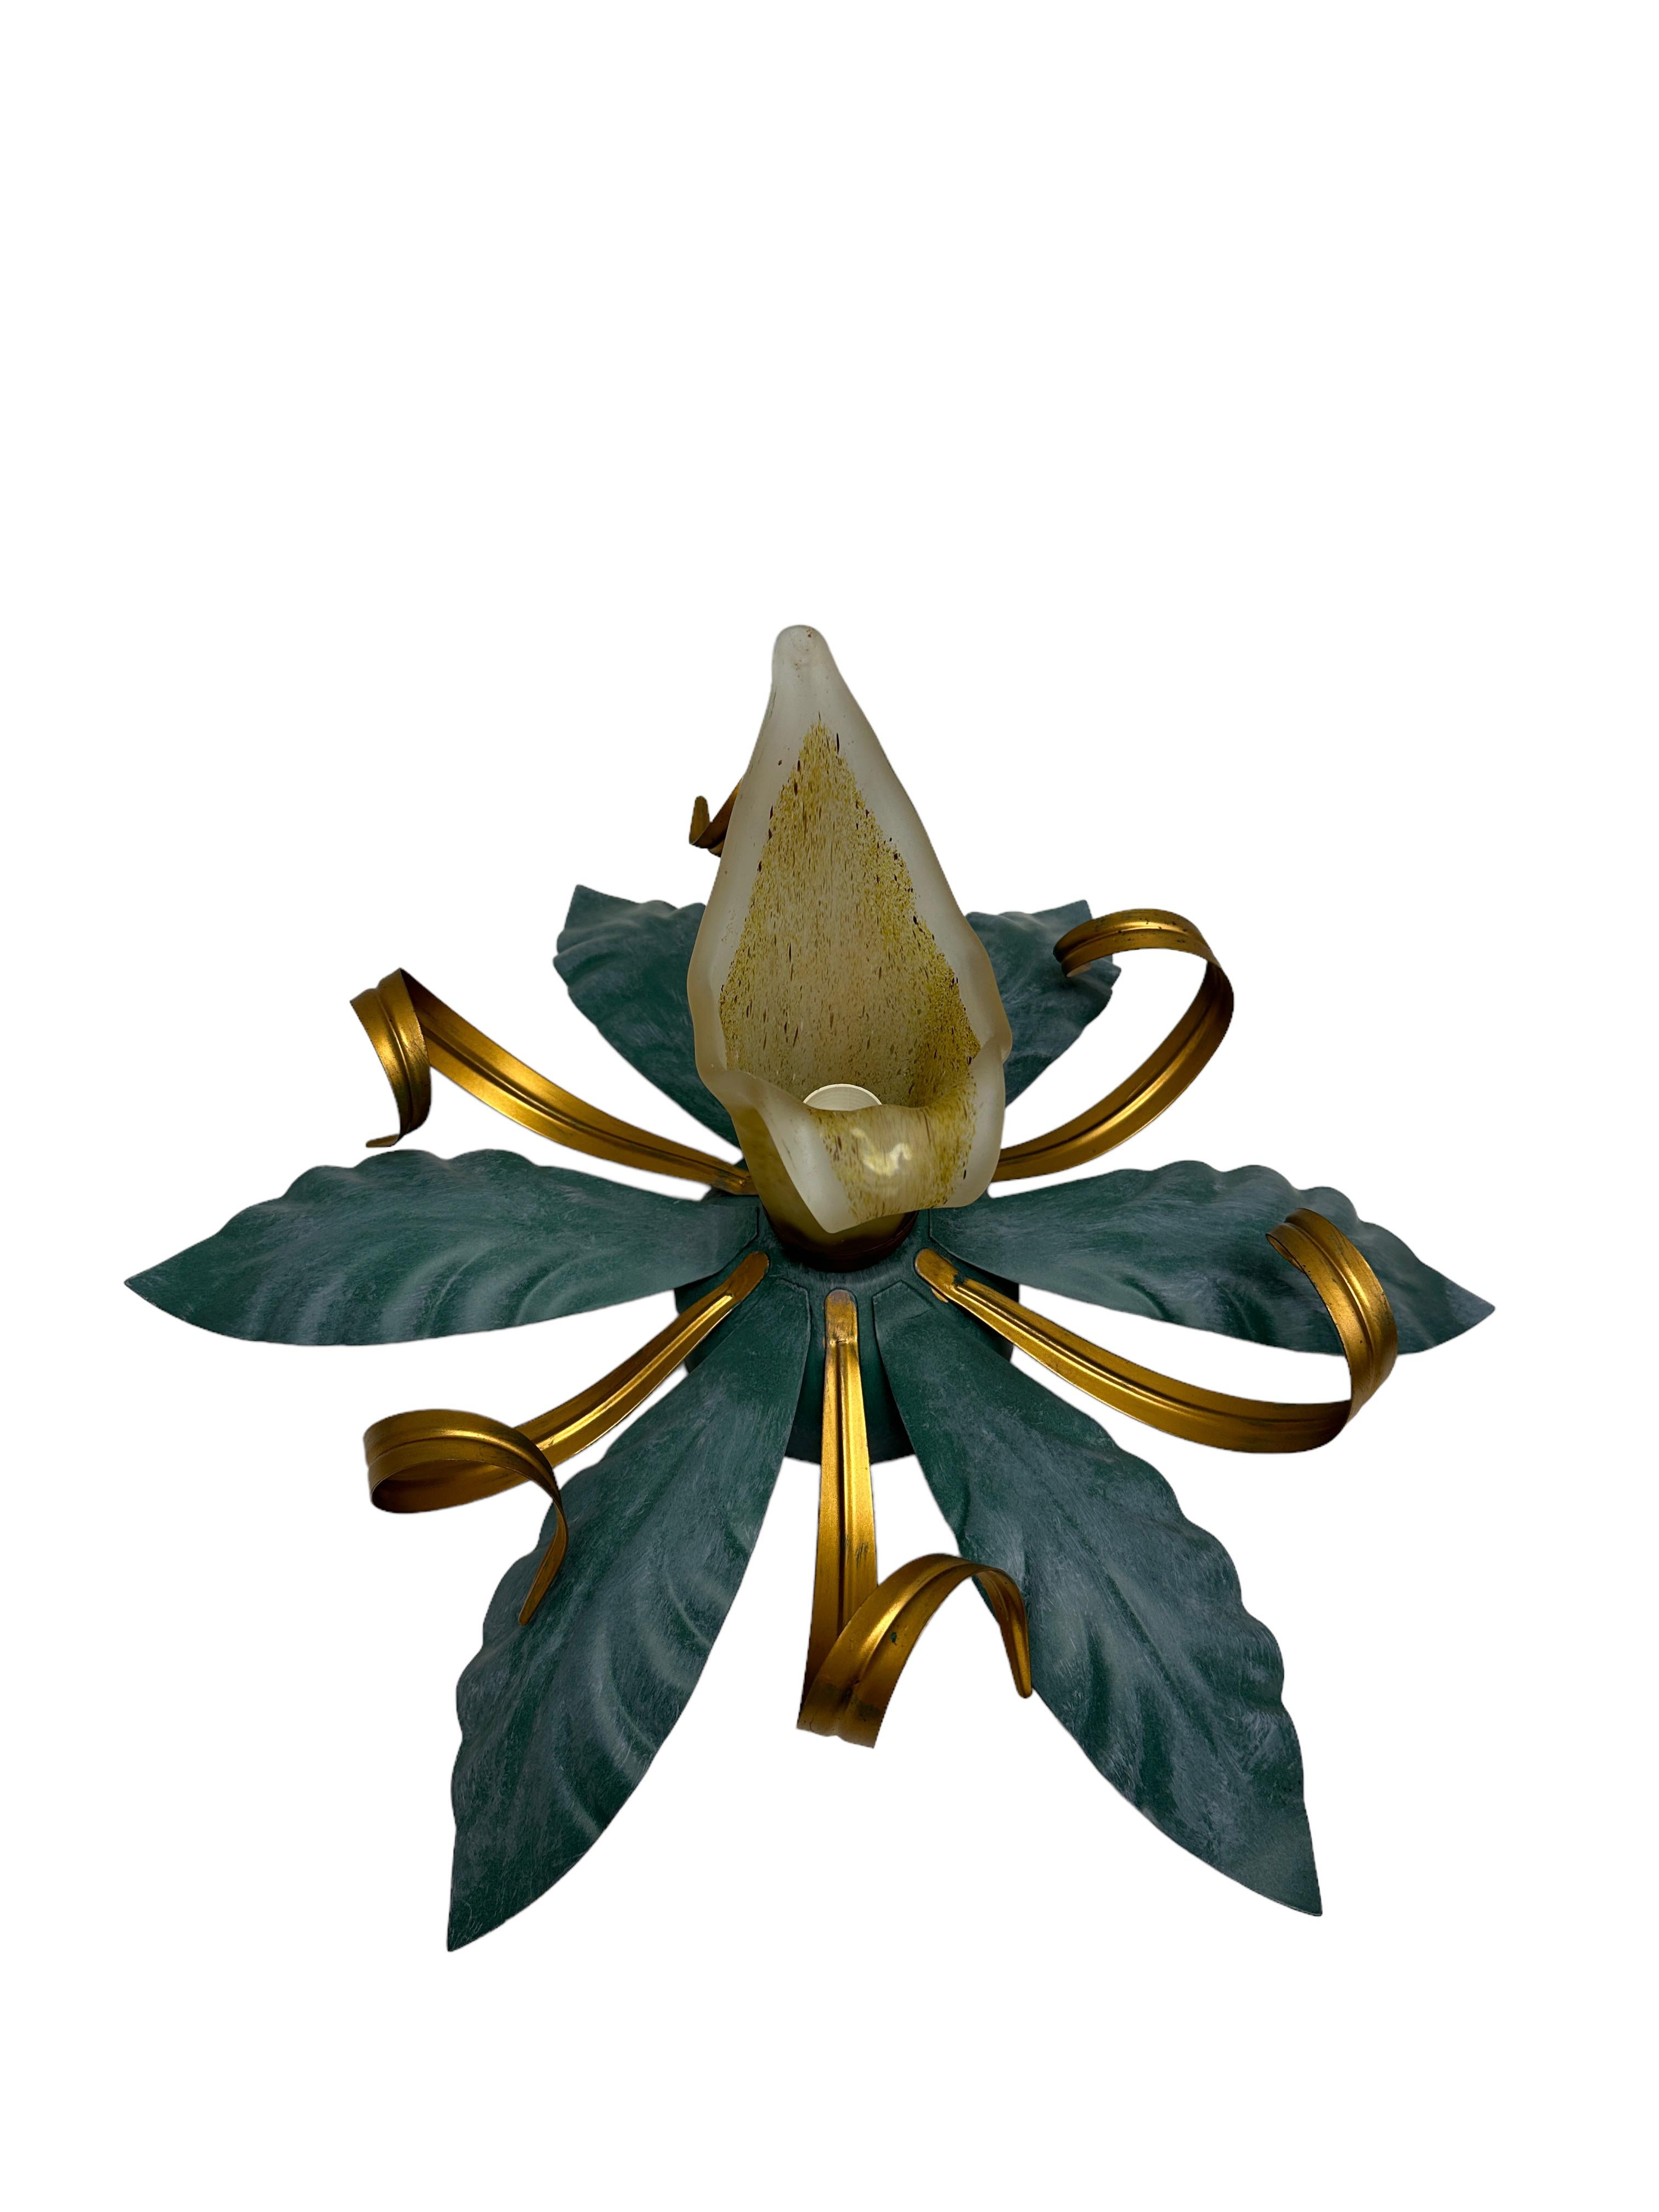 This floral Hollywood Regency or Florentine flush mount is decorated with glass Shades and metal leaves. Flower calyx made of heavy Murano Glass. The fixture requires one European E14 / 110 Volt candelabra bulb, up to 40 watts. This light fixture